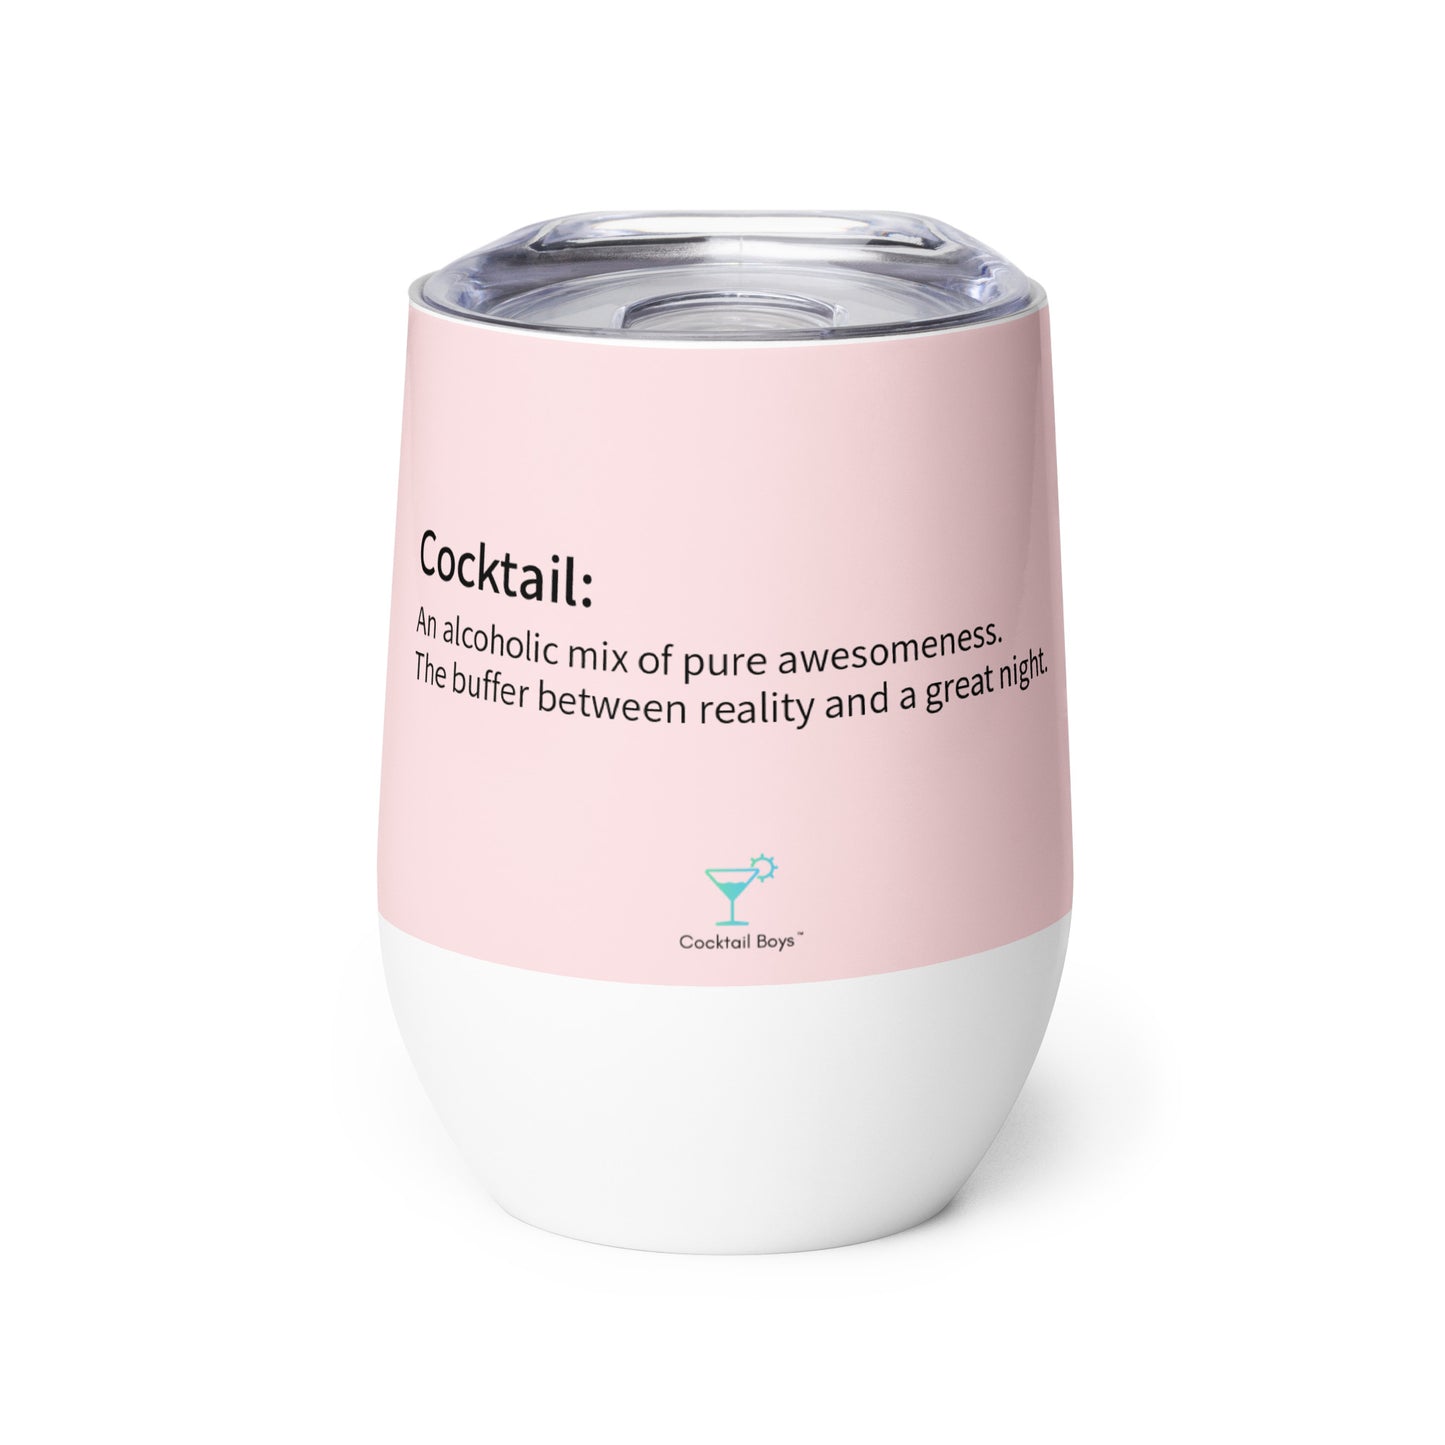 Cocktail Dictionary Definition Wine tumbler